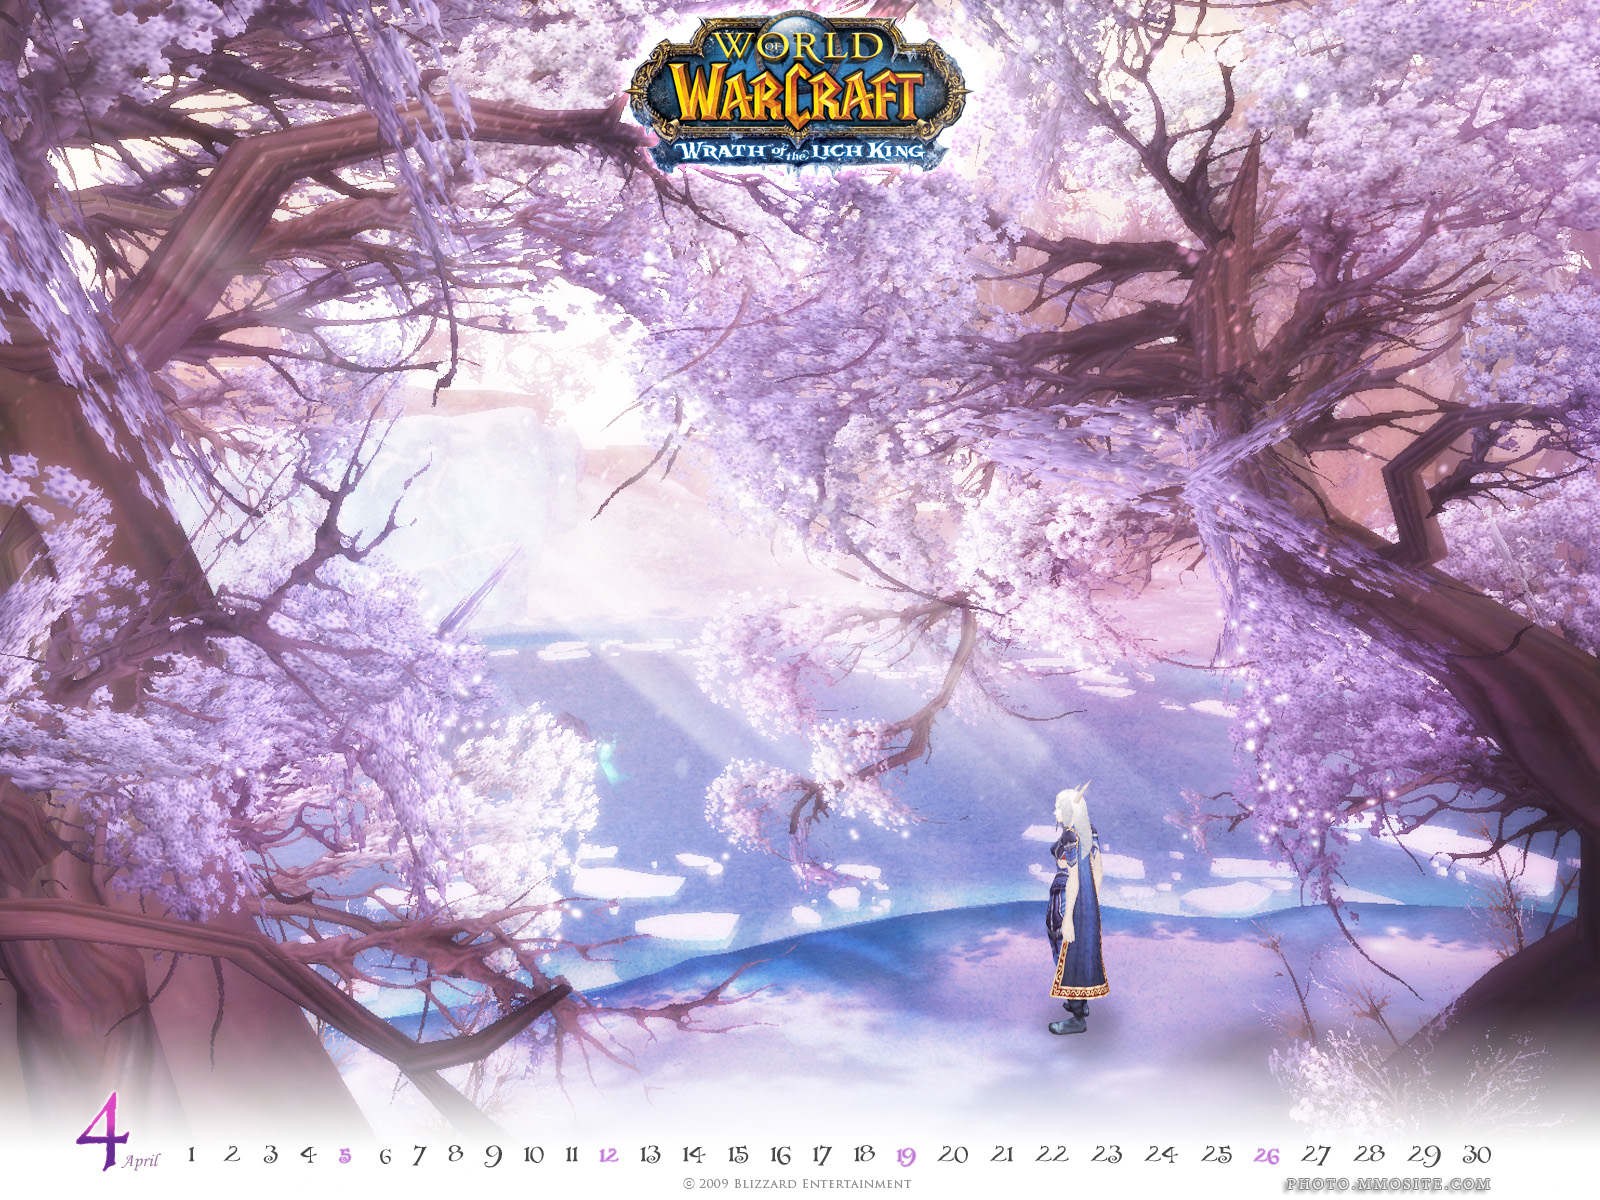 General 1600x1200 World of Warcraft World of Warcraft: Wrath of the Lich King video games Blizzard Entertainment calendar PC gaming numbers